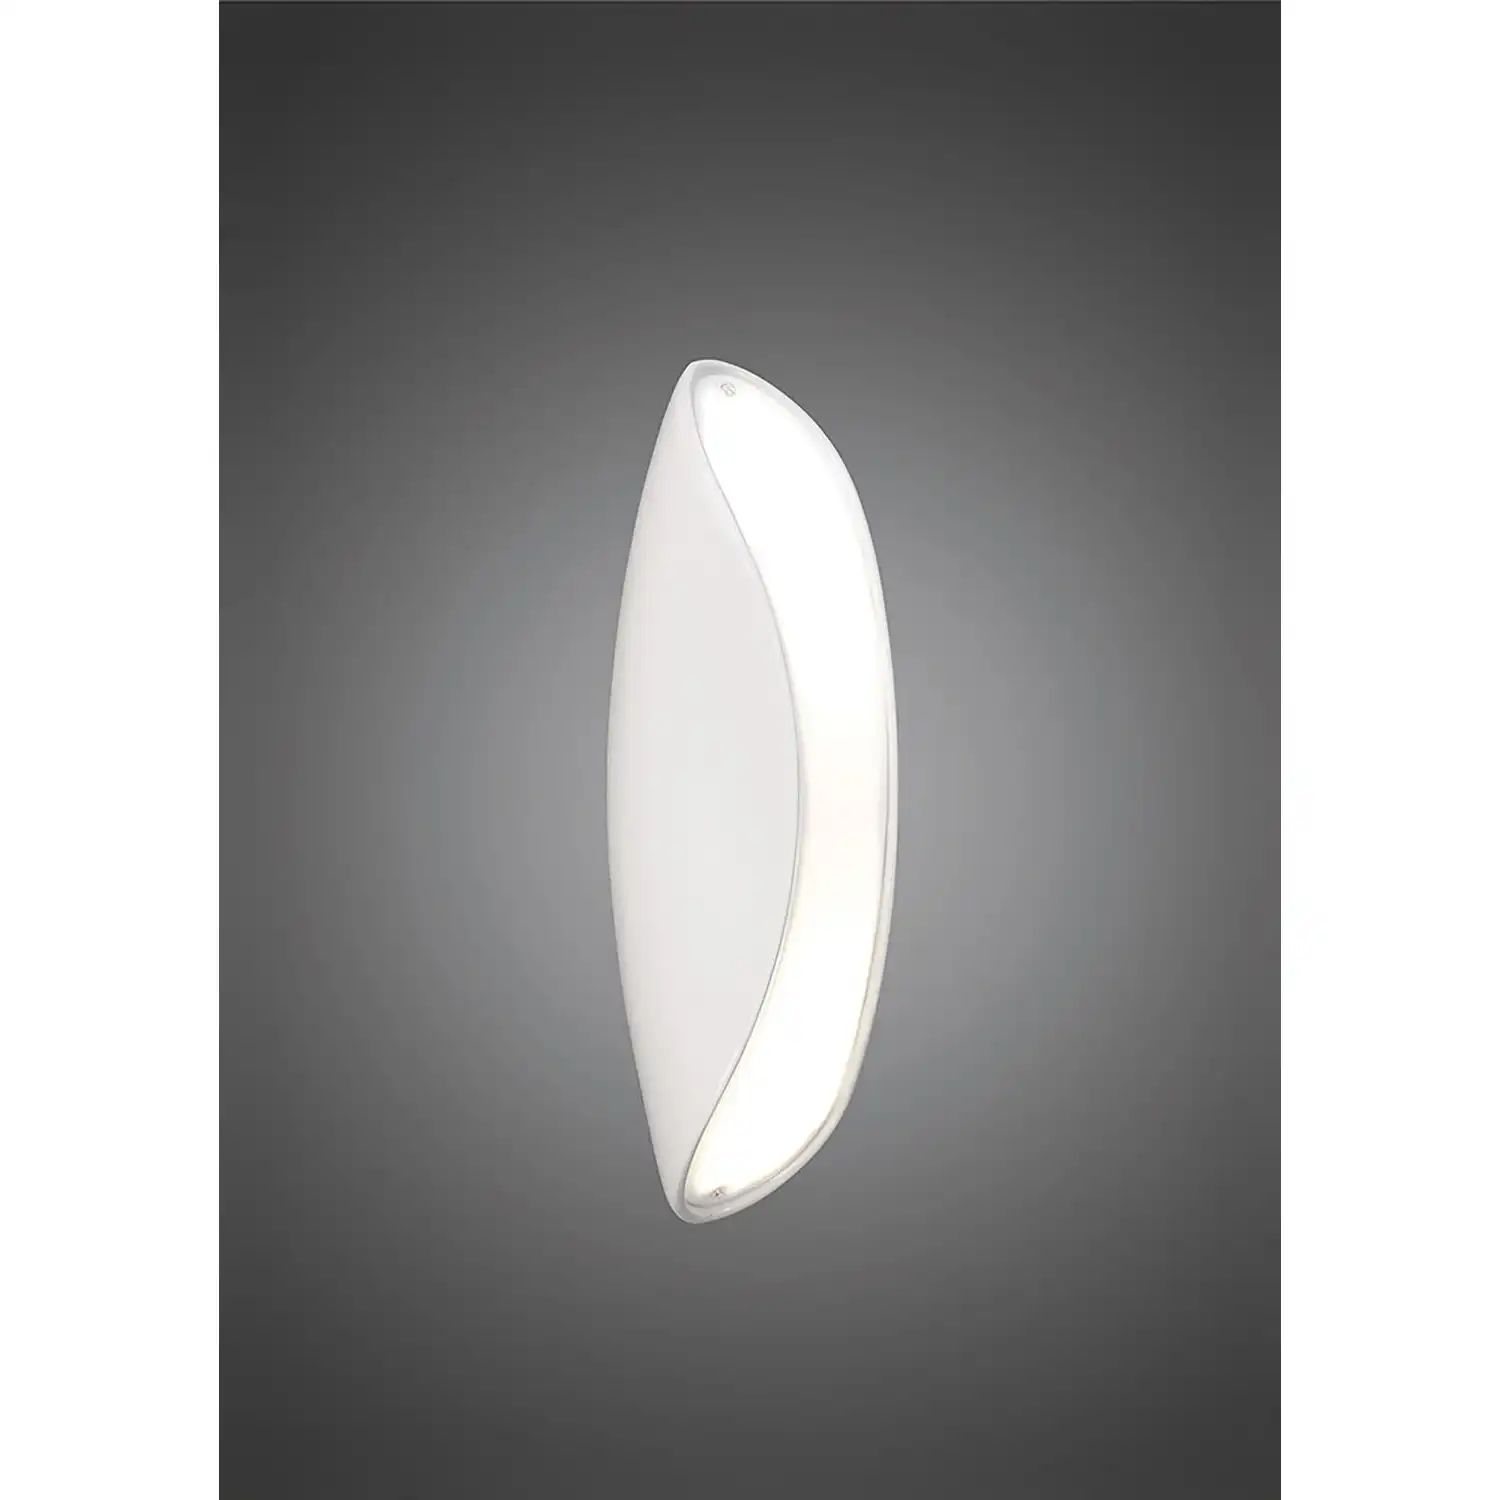 Pasion Wall Lamp 2 Light E27, Gloss White White Acrylic Polished Chrome, CFL Lamps INCLUDED